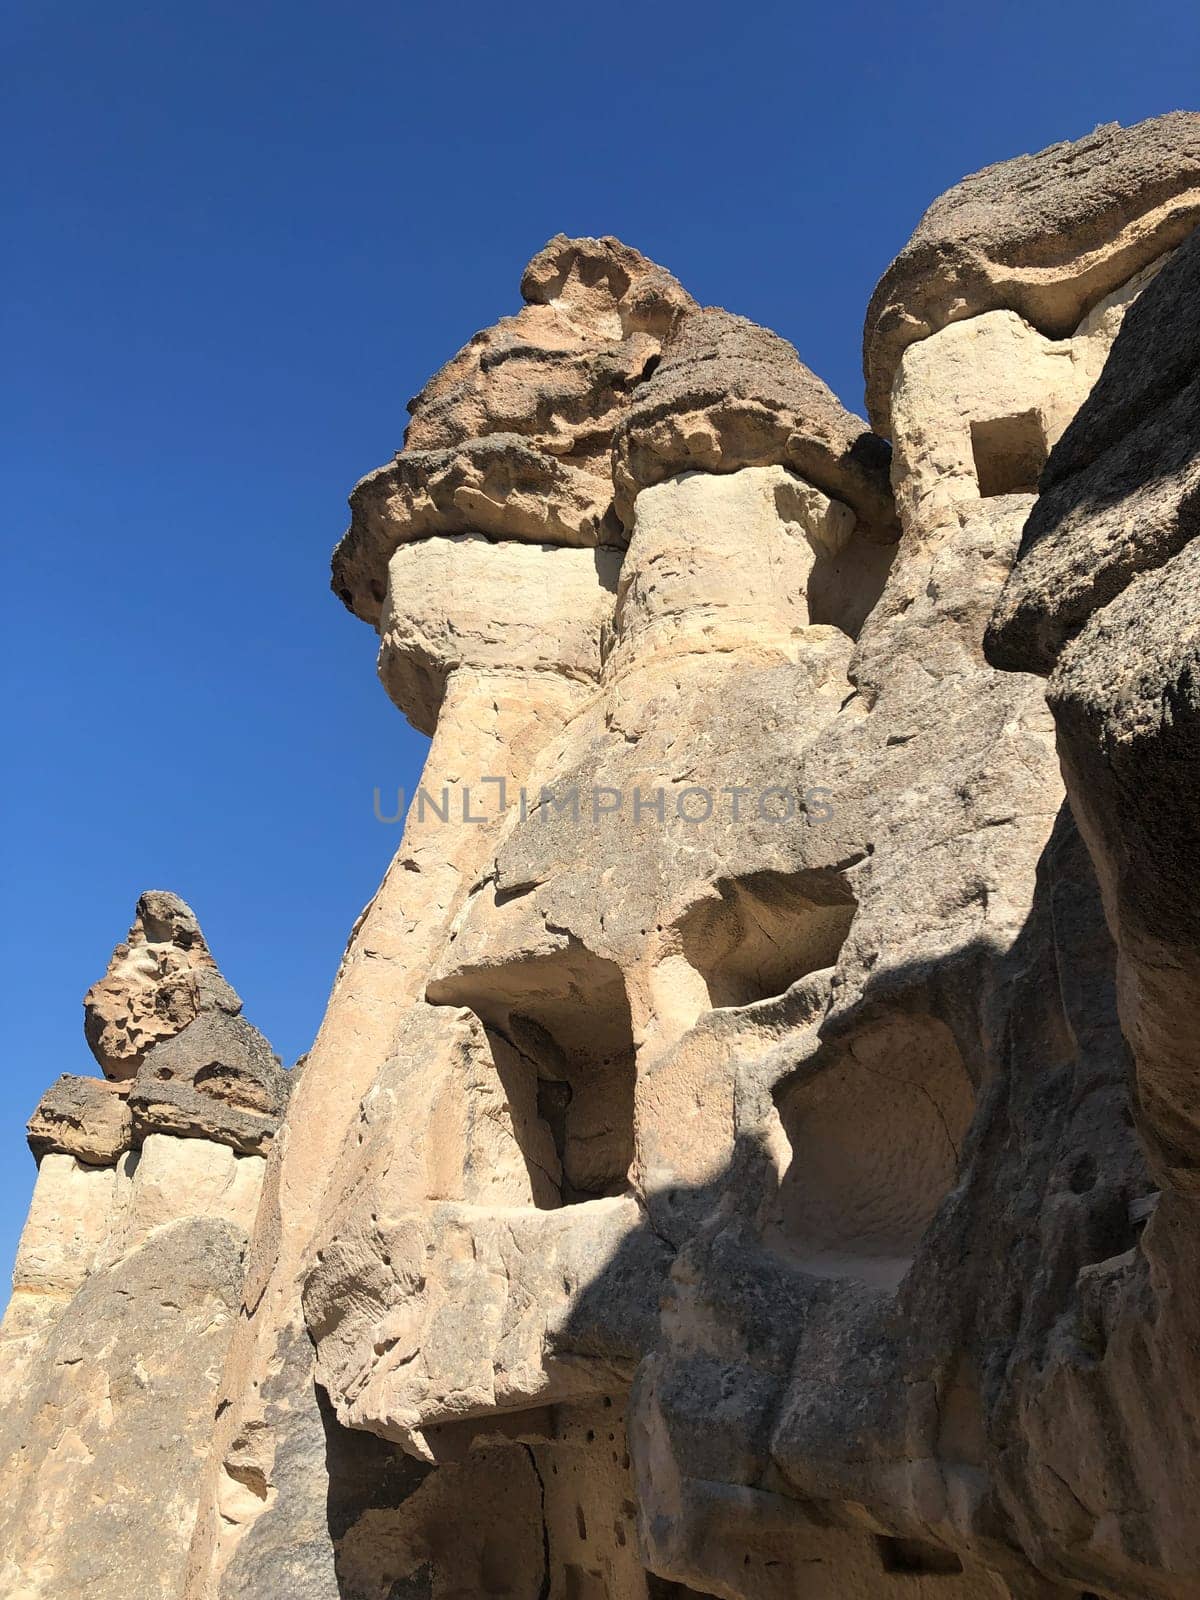 Aerial drone shot of the Fairy Chimneys over the landscape of Goreme, Cappadocia. High quality photo